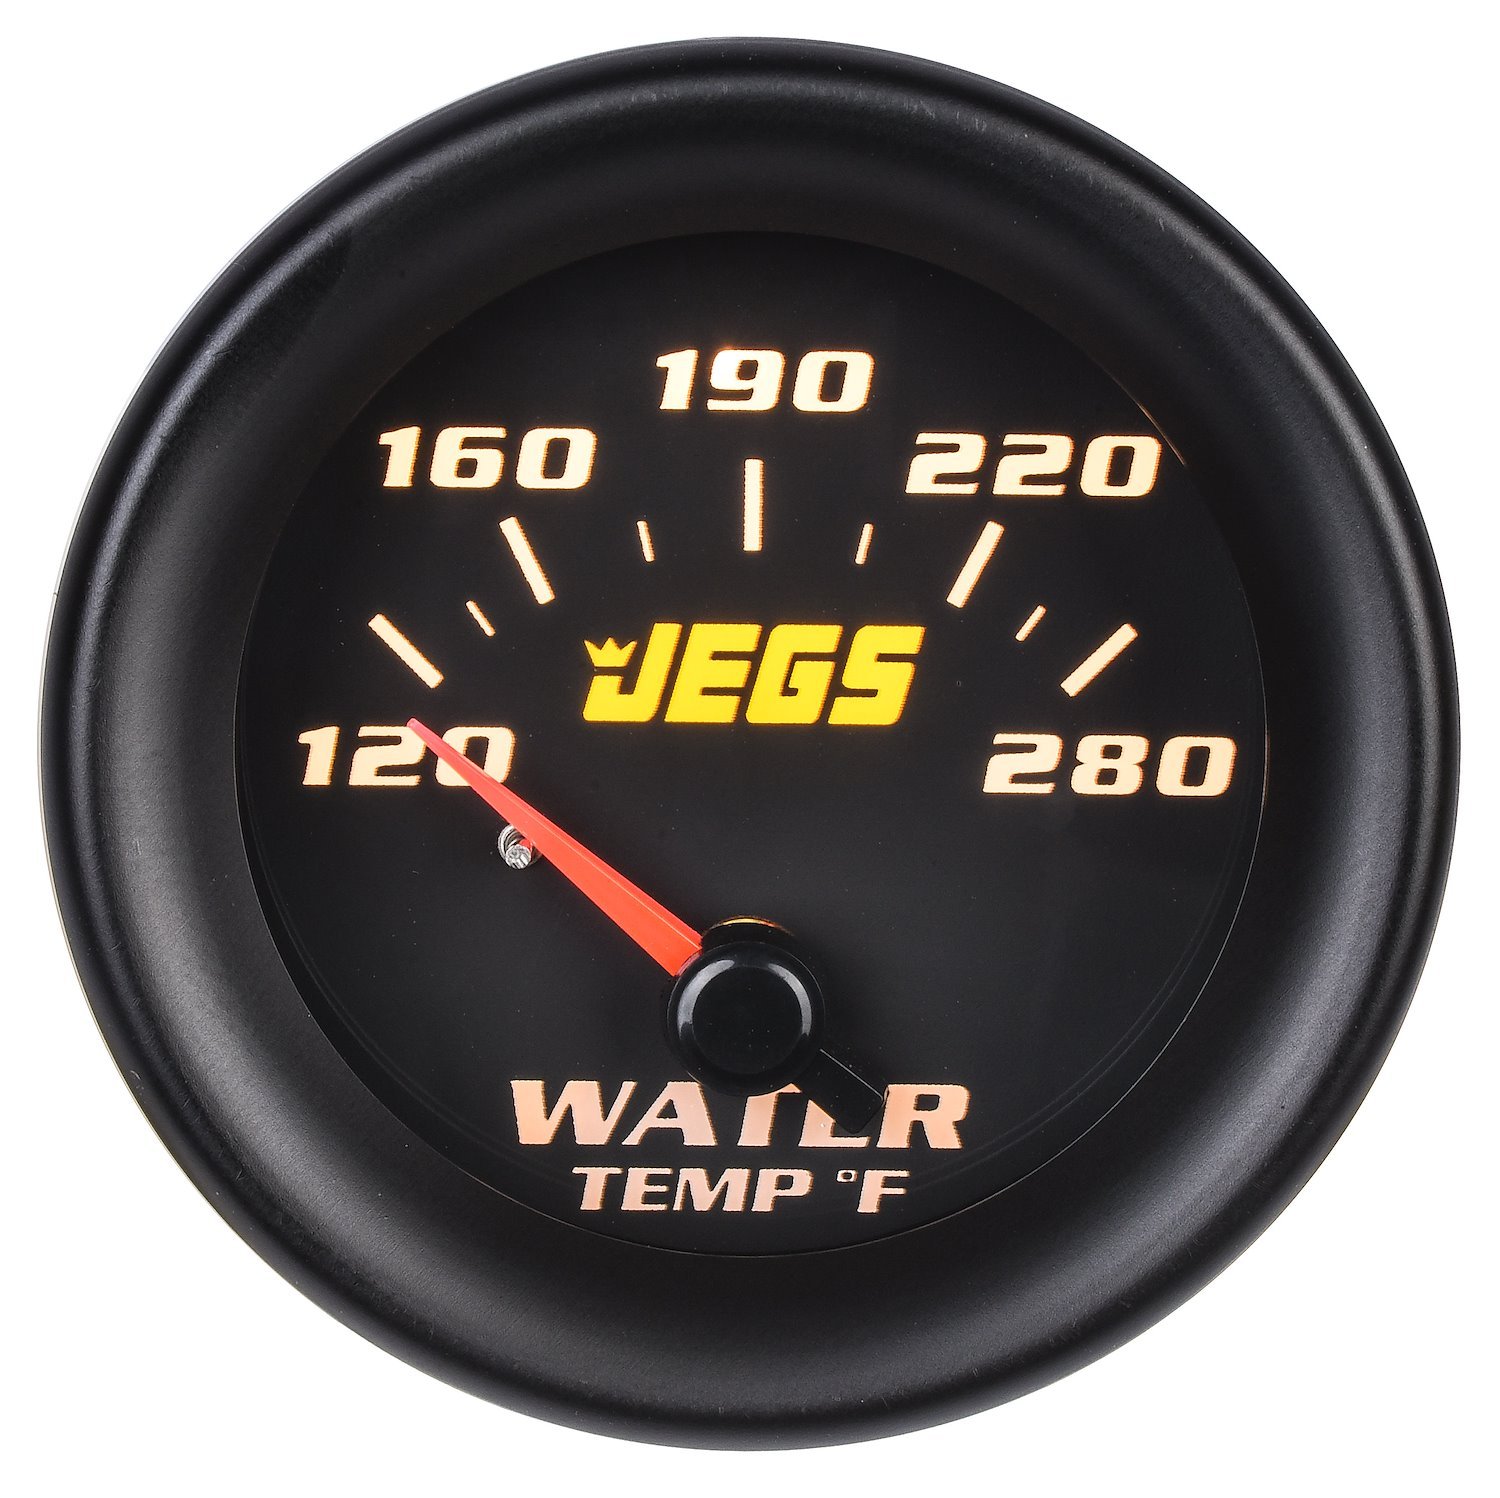 Water Temperature Gauge [2 1/16 in. Electrical, 120-280 Degree F with Black Face]